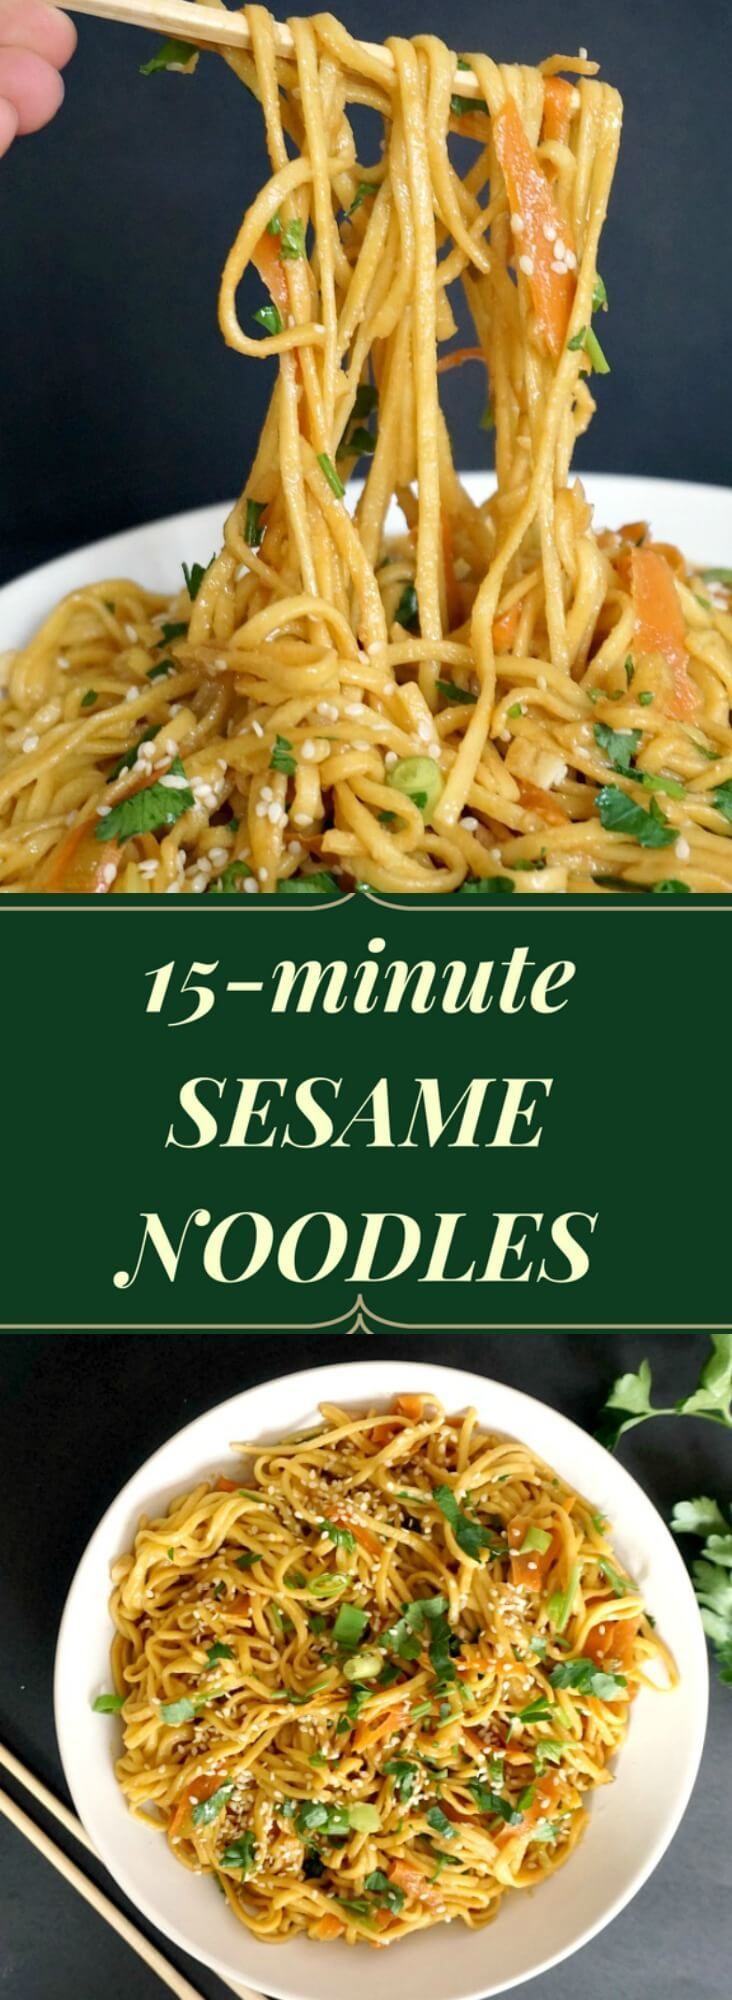 Sesame noodles, a delicious and healthy Chinese recipe that is ready in about 15 minutes. The quickest and easiest vegetarian dinner for busy families. -   23 vegetarian chinese recipes
 ideas